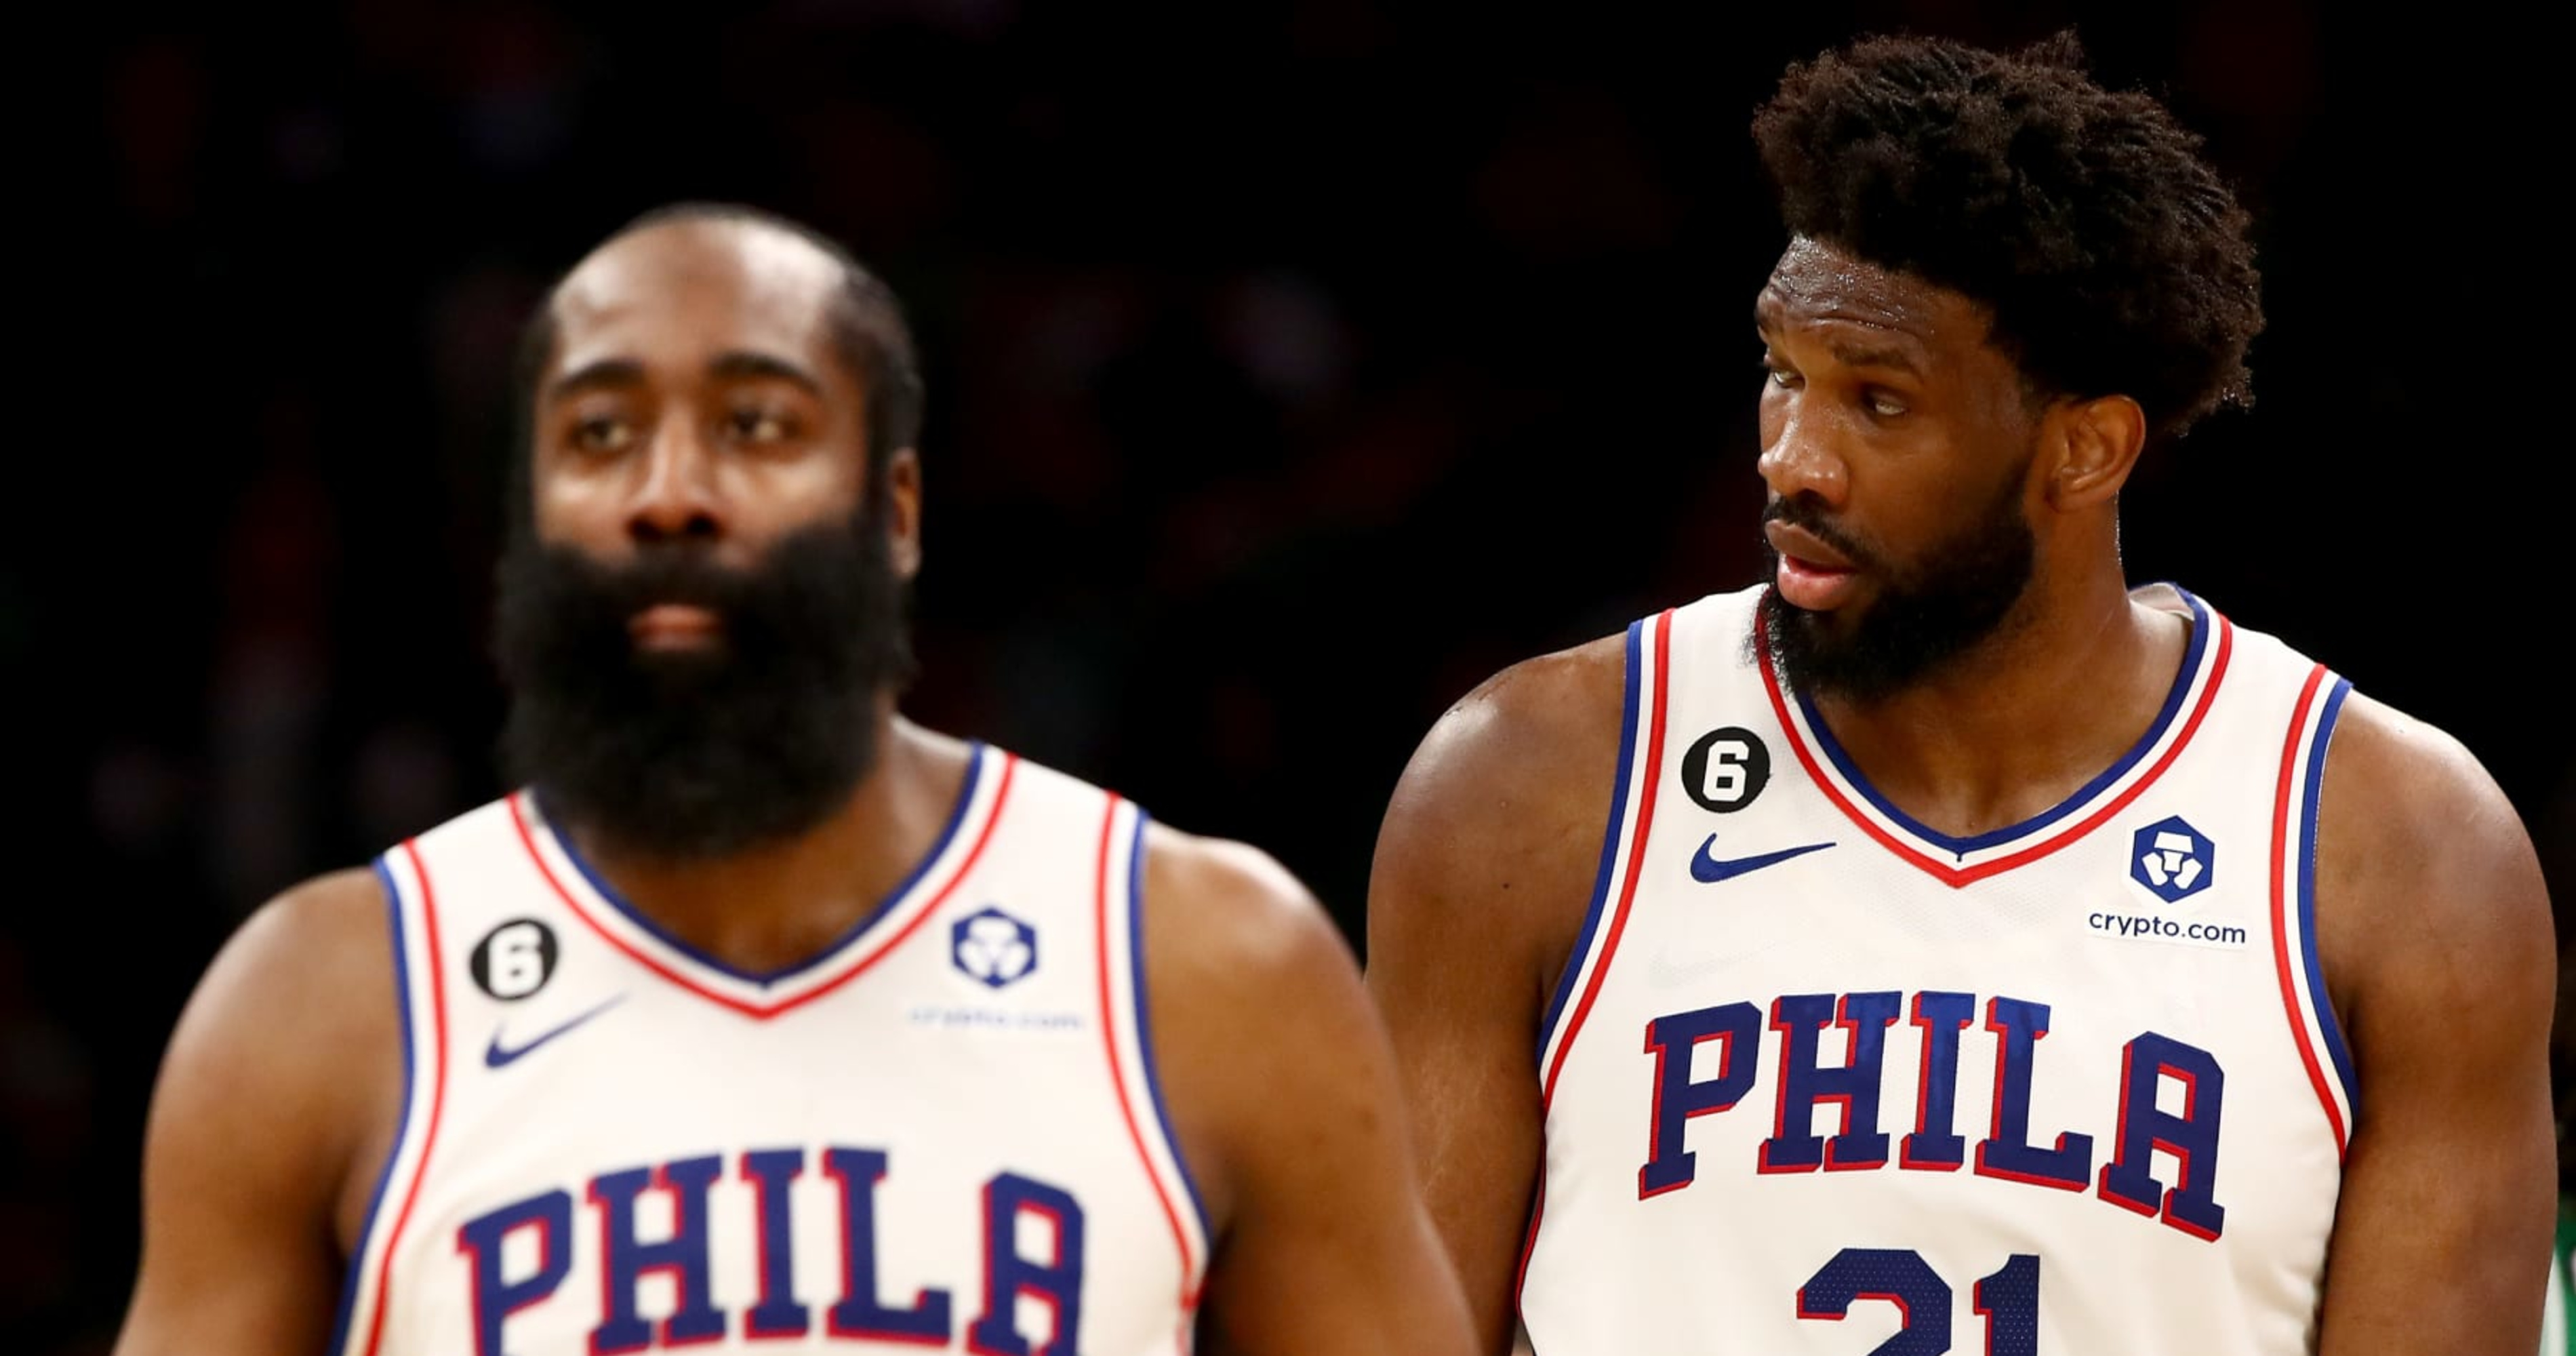 NBA free agency: Why the Sixers have flexibility to remake their